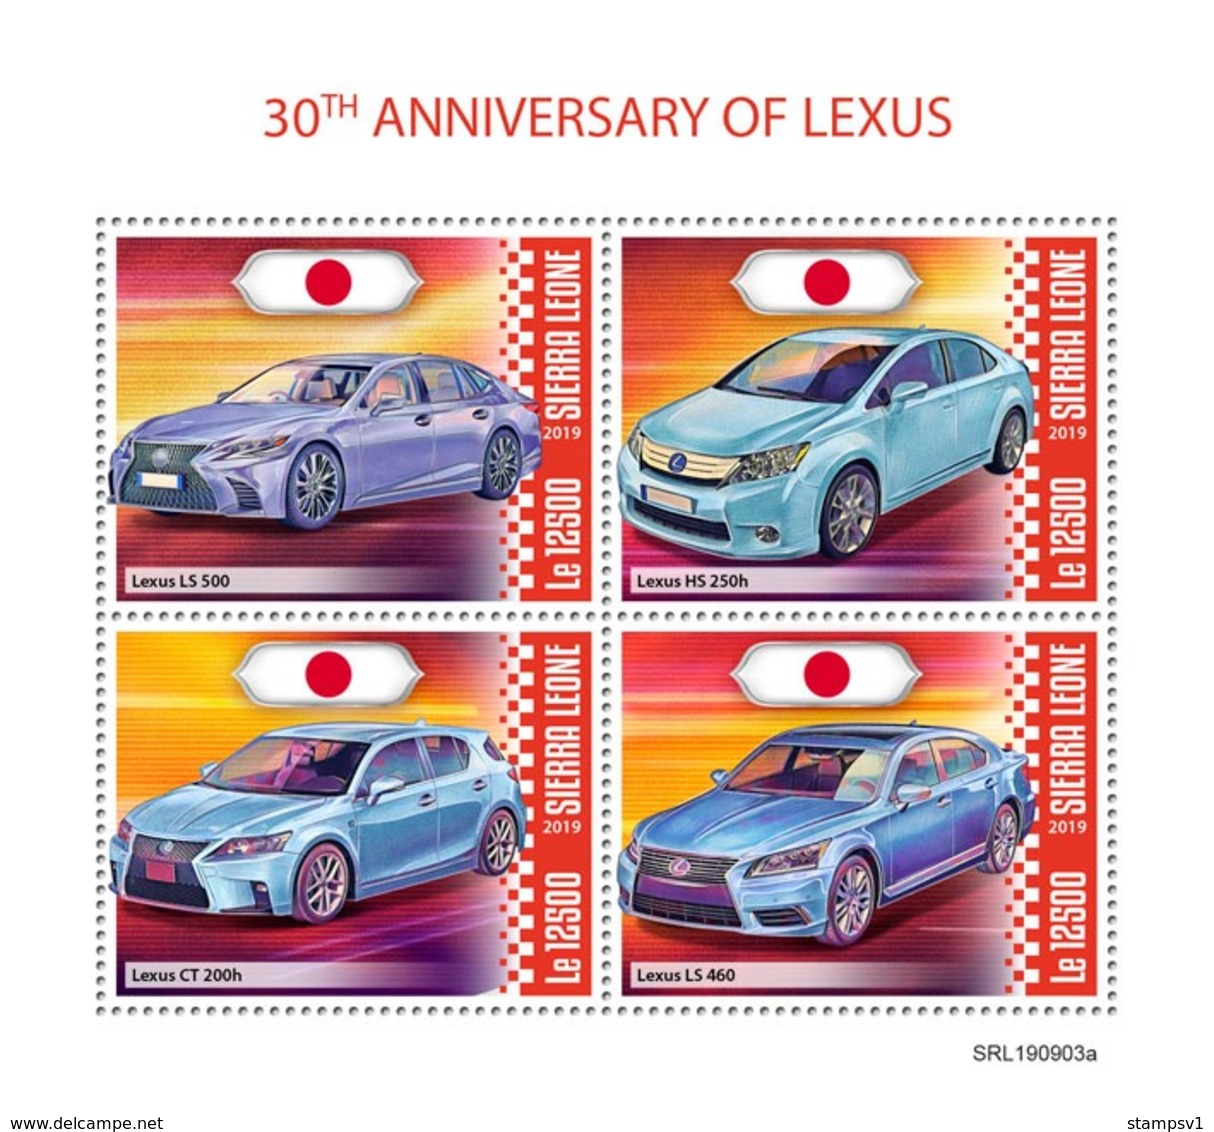 Sierra Leone. 2019 30th Anniversary Of Lexus. (0903a)  OFFICIAL ISSUE - Voitures